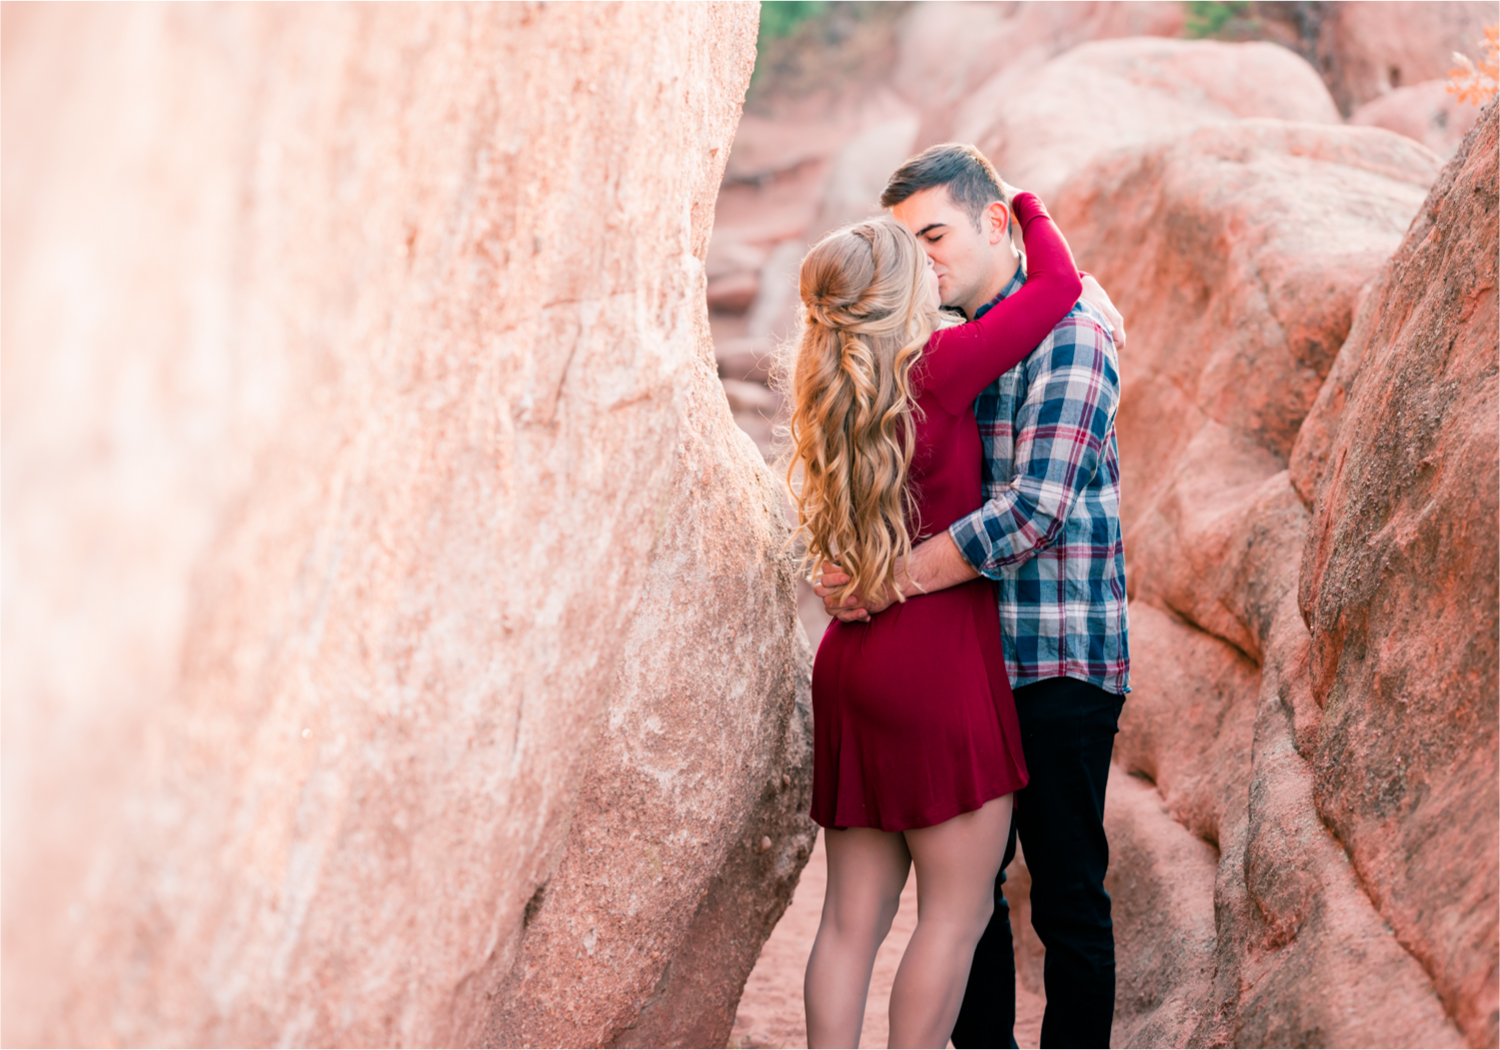 Winter Engagement at Red Rock Canyon Open Space in Colorado Springs | Britni Girard Photography Colorado Wedding Photography and Videography Team | Romantic strolls through the canyons and snuggles from the cold for these two Air Force Academy Graduates